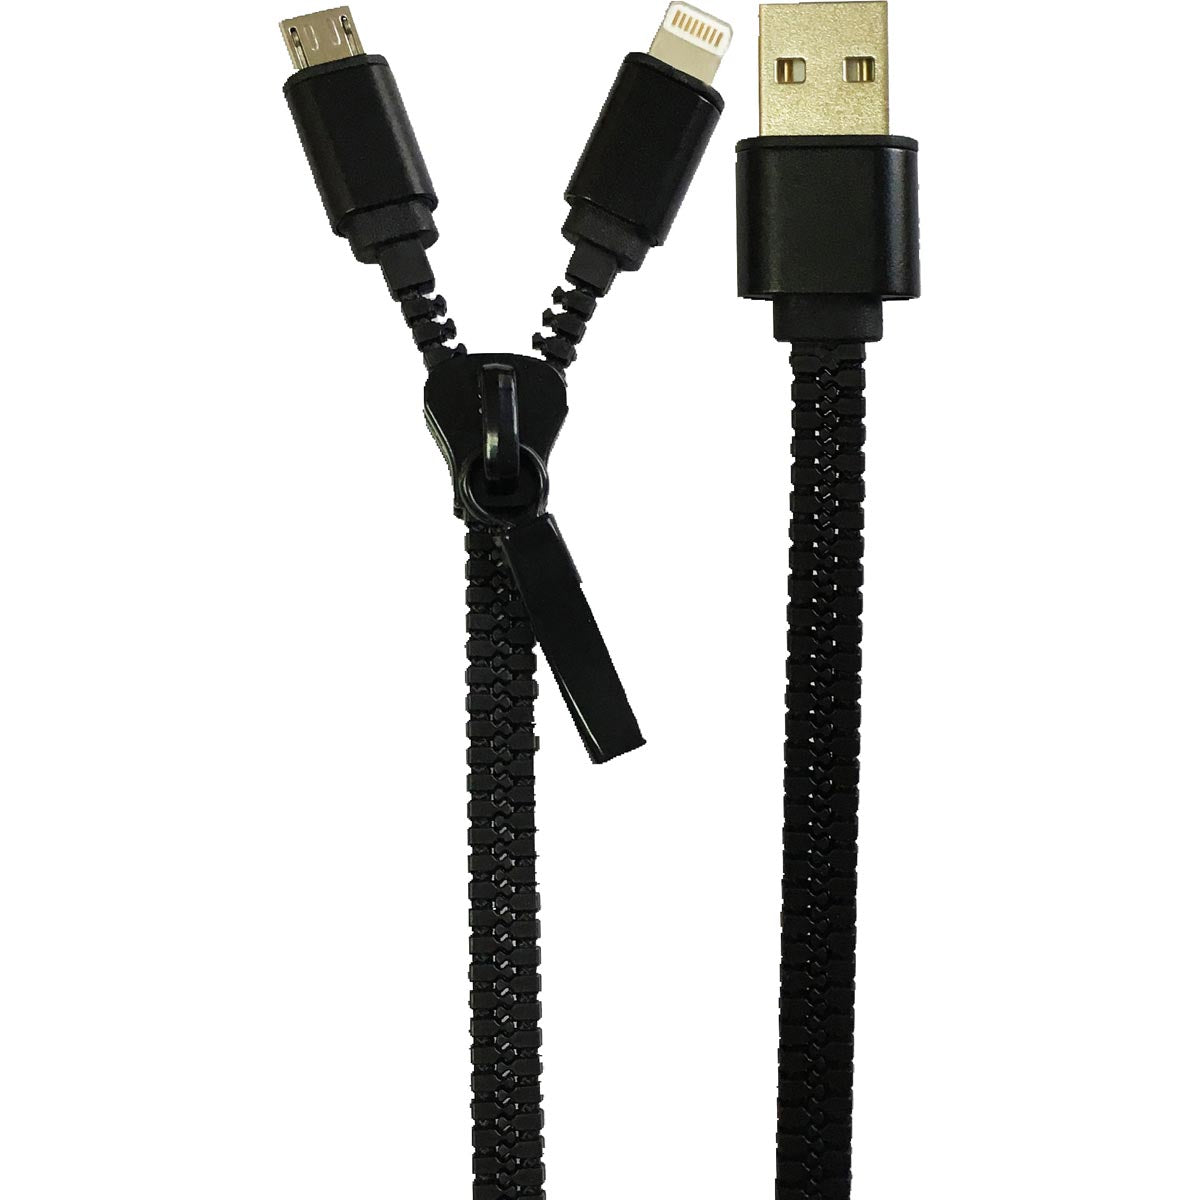 Simply Zip-Up 2 in 1 Micro and Lightning Cable 1m - Black